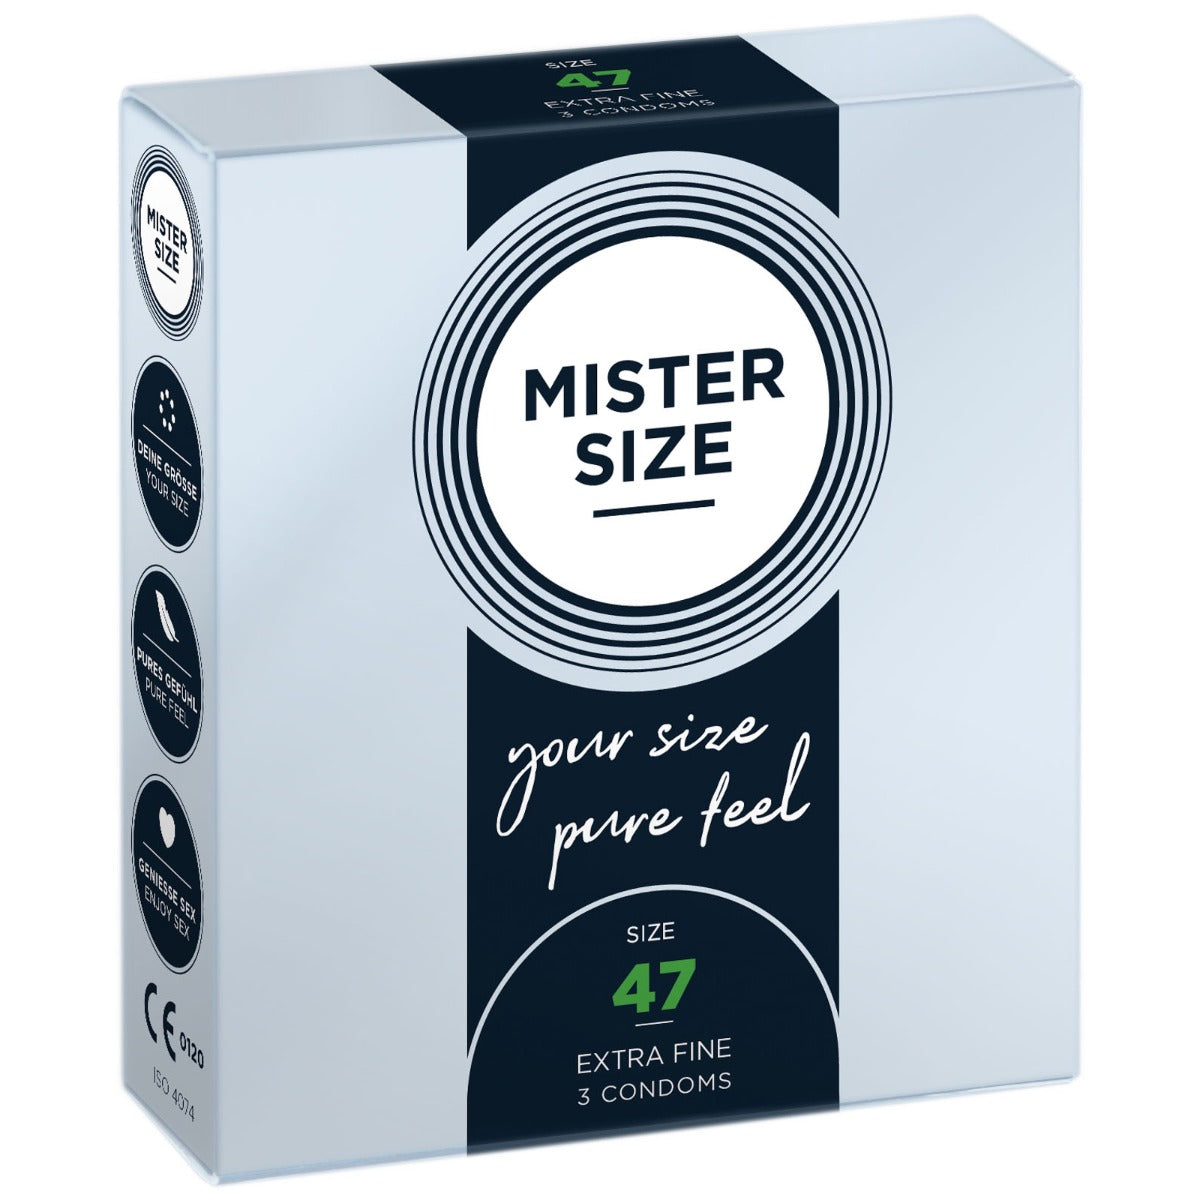 MISTER SIZE | Pure feel Condoms - size 47 mm (3 pack)